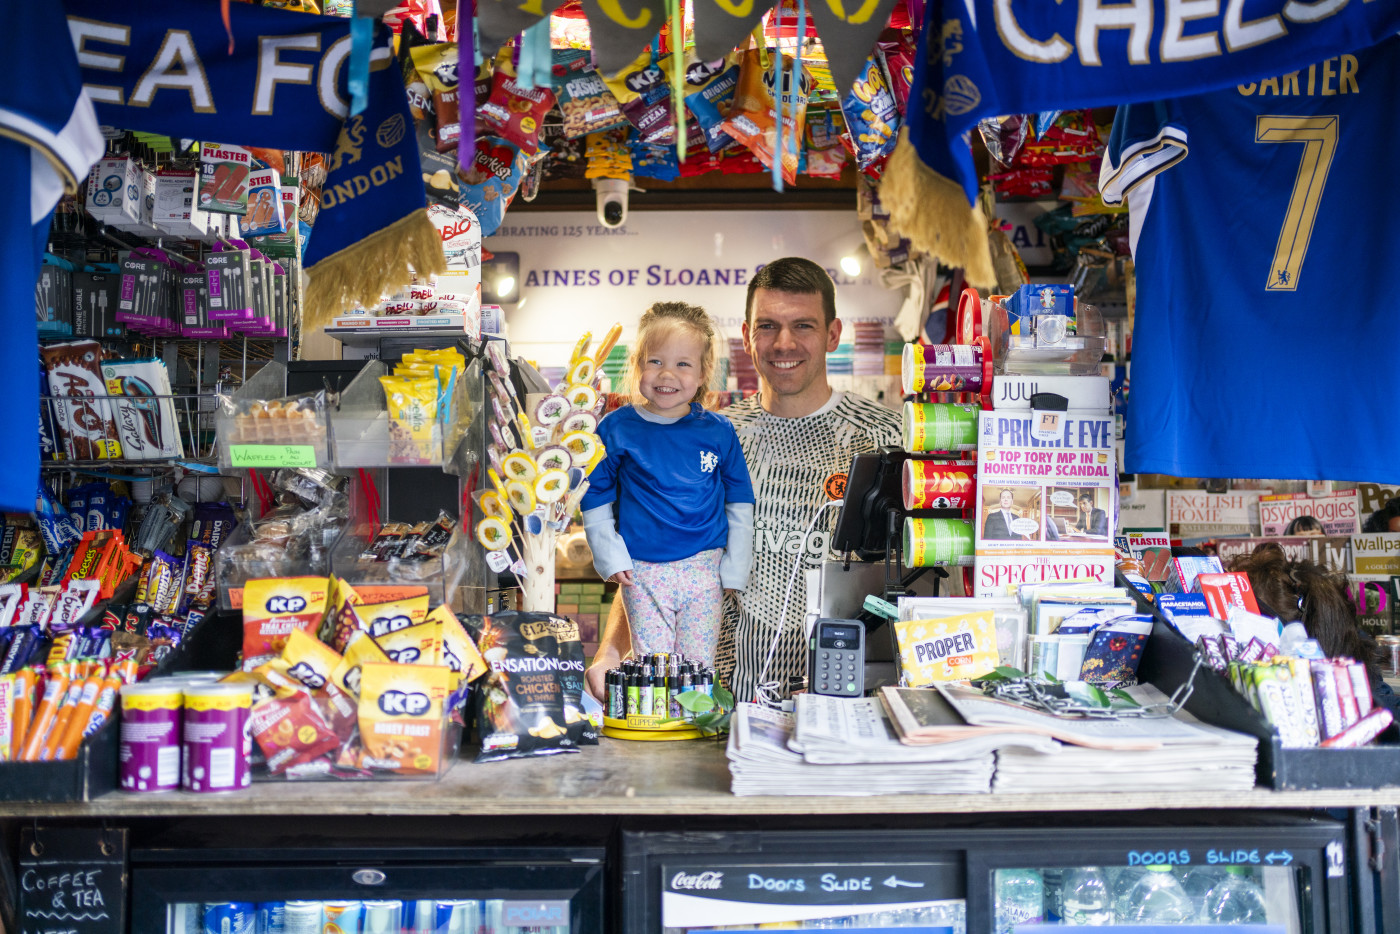 Haines of Sloane Square is London's oldest family-run newsstand